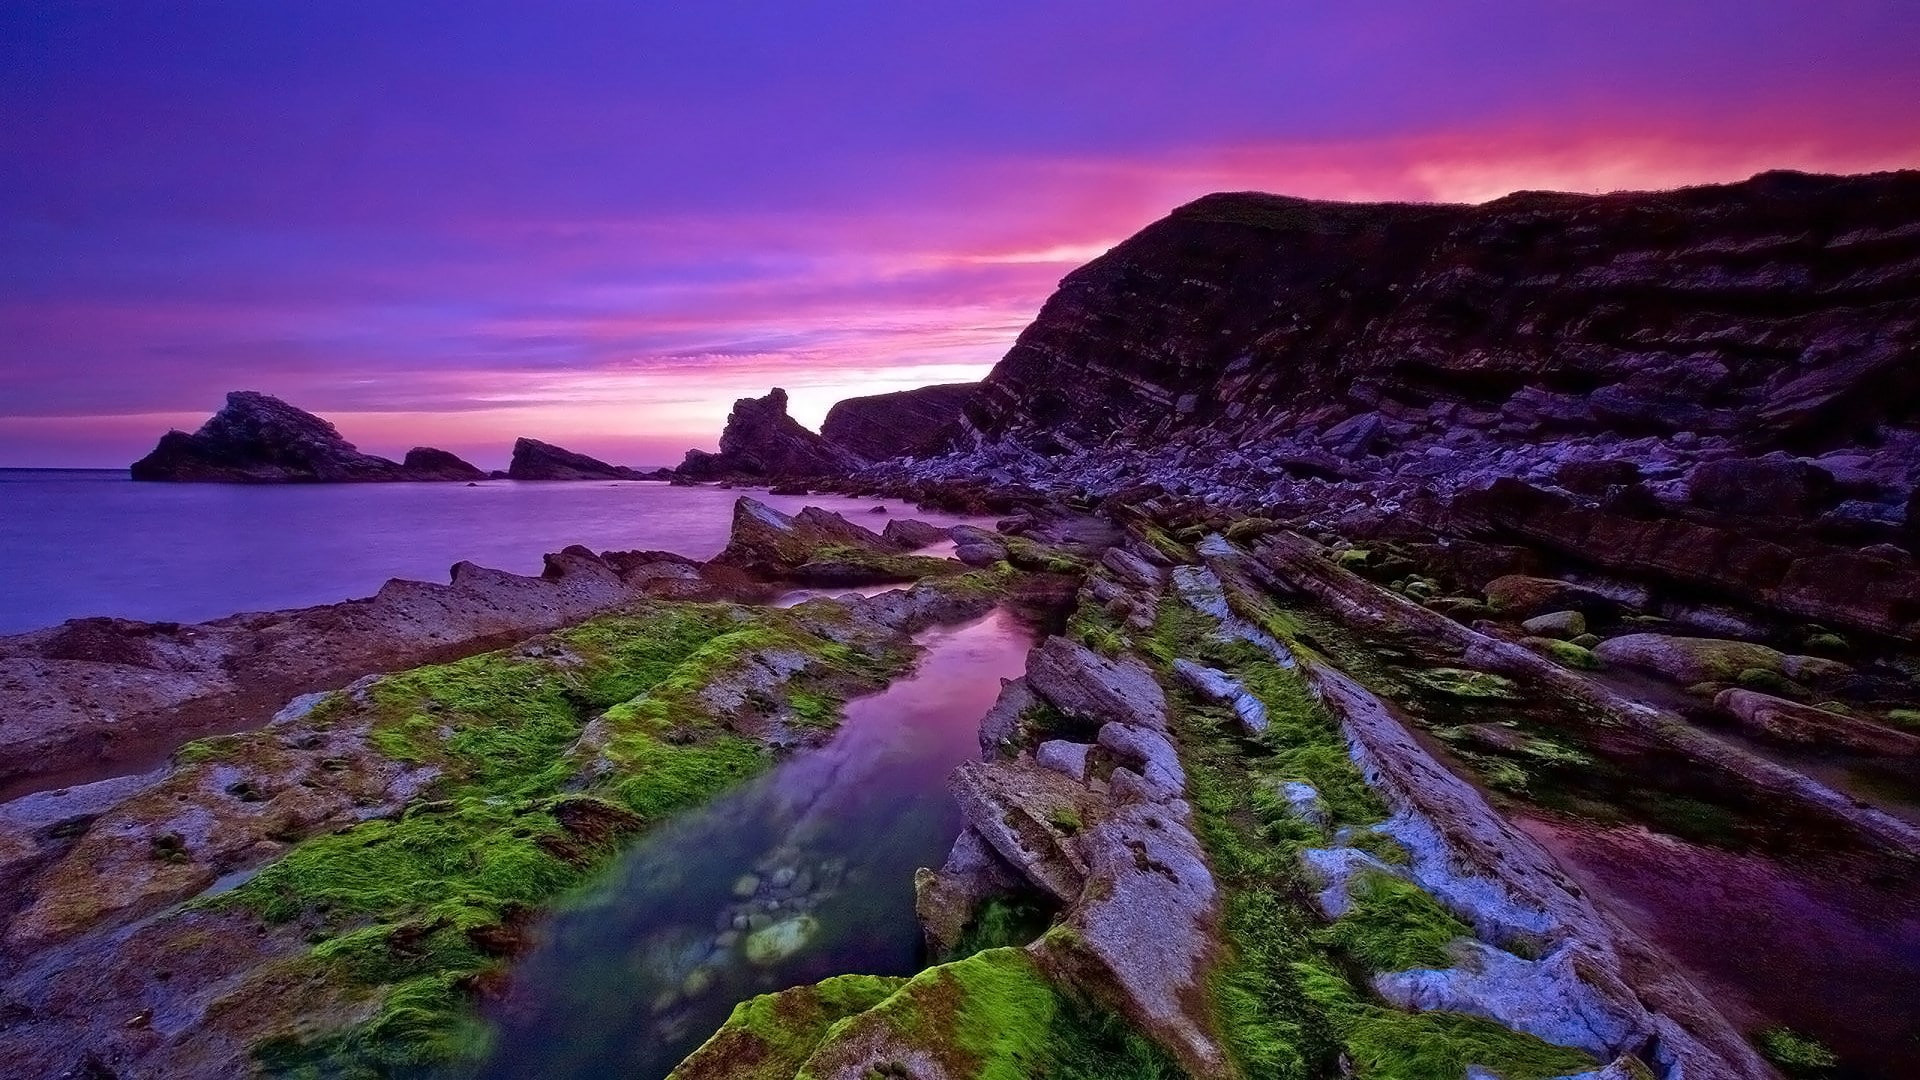 Algae Covered Rocks Body Of Water Mountains Under Purple Pink Clouds Sky Scenery HD Nature